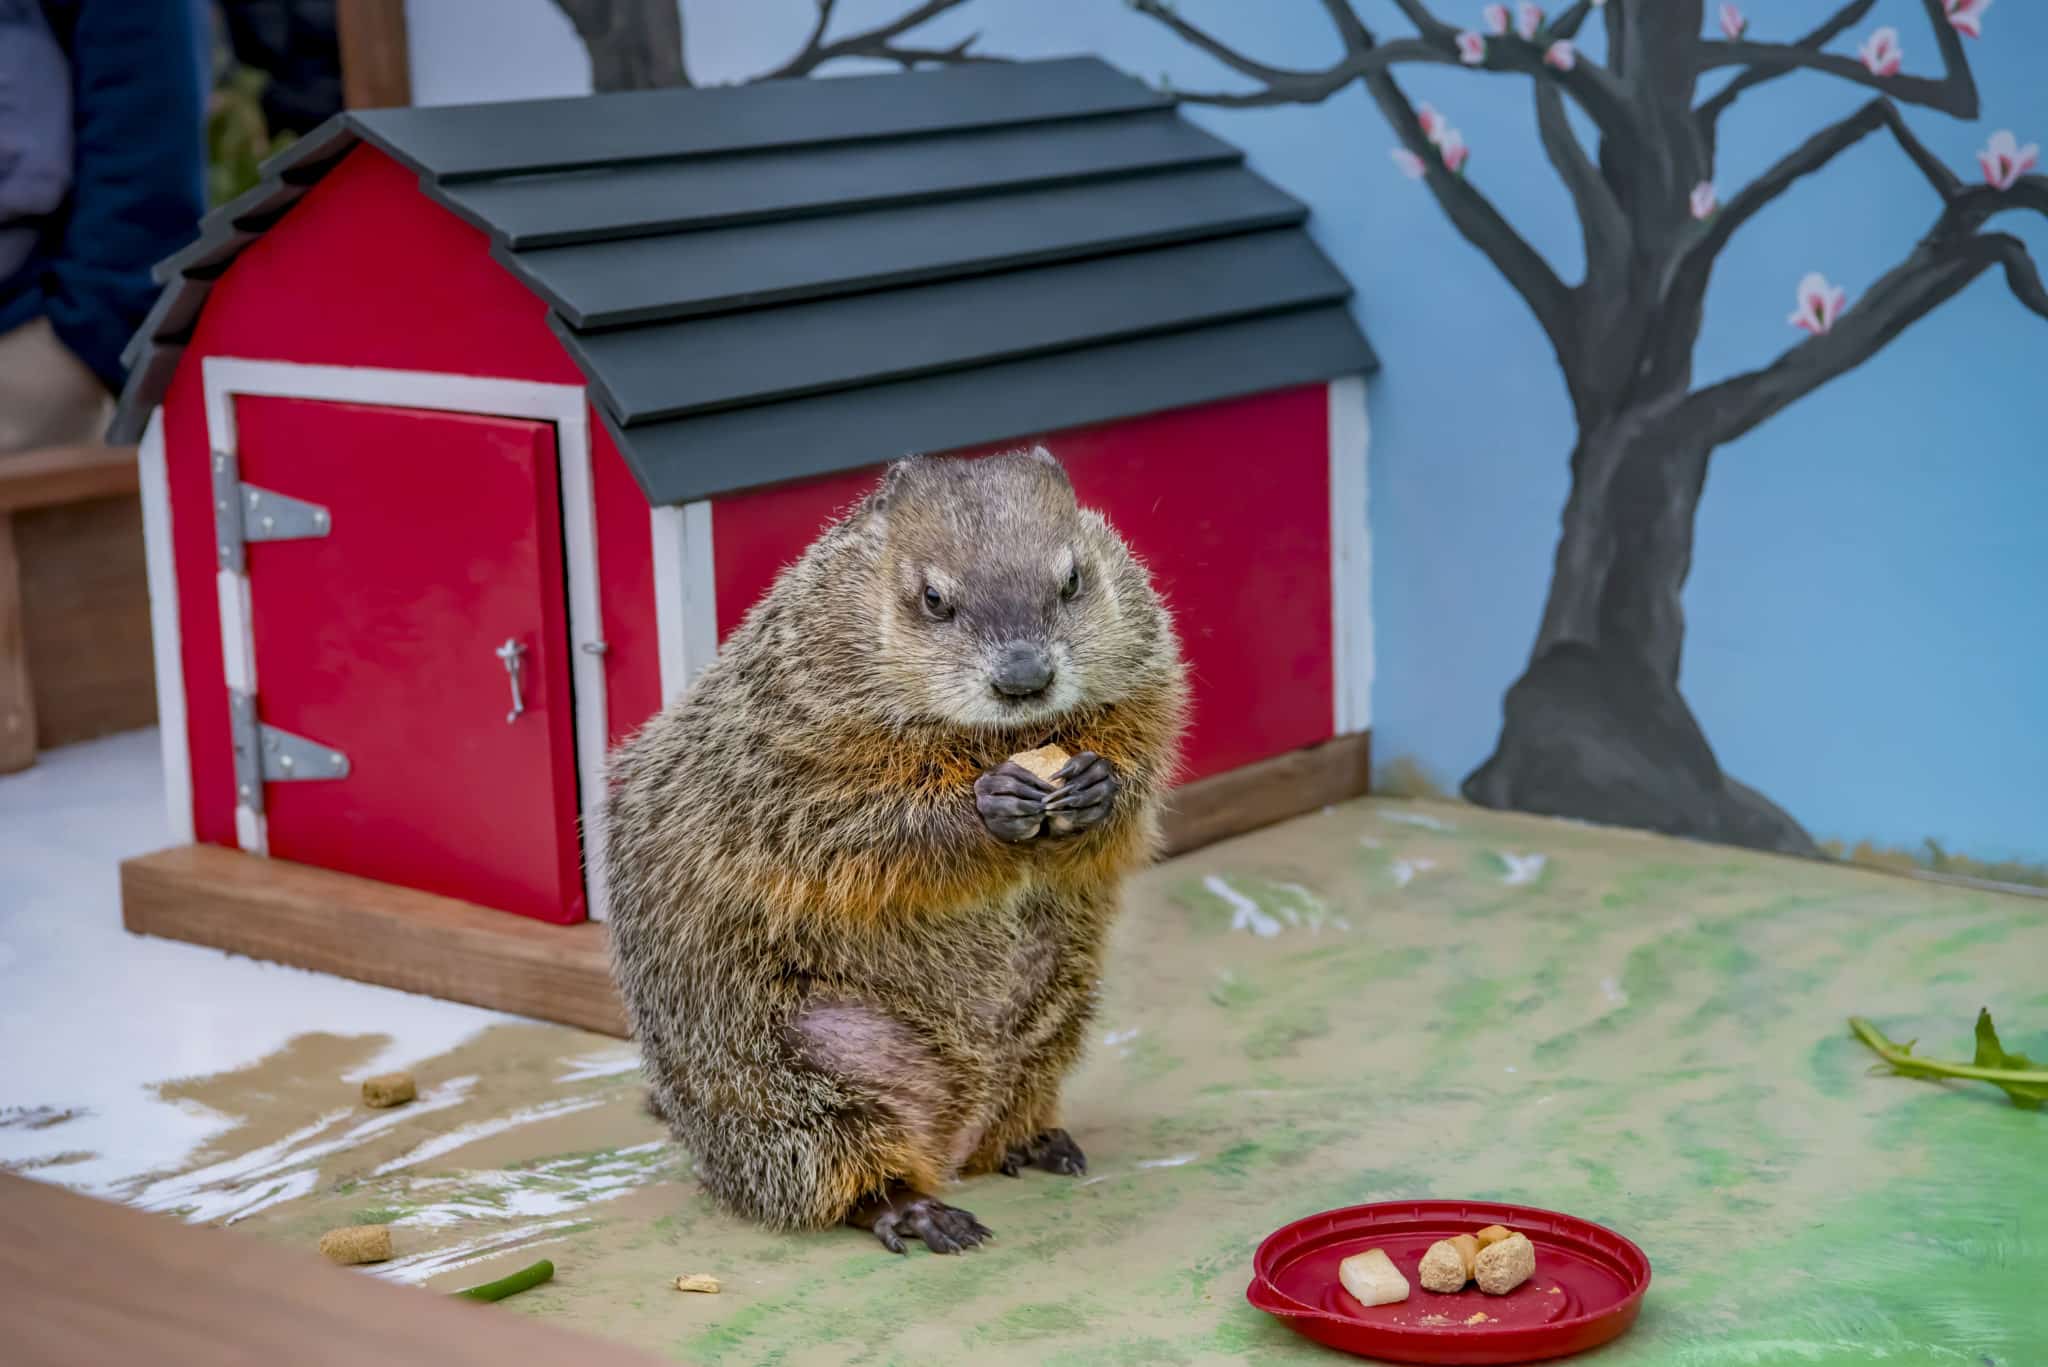 Early spring is in the forecast according to Sun Prairie's Jimmy the Groundhog WTMJ